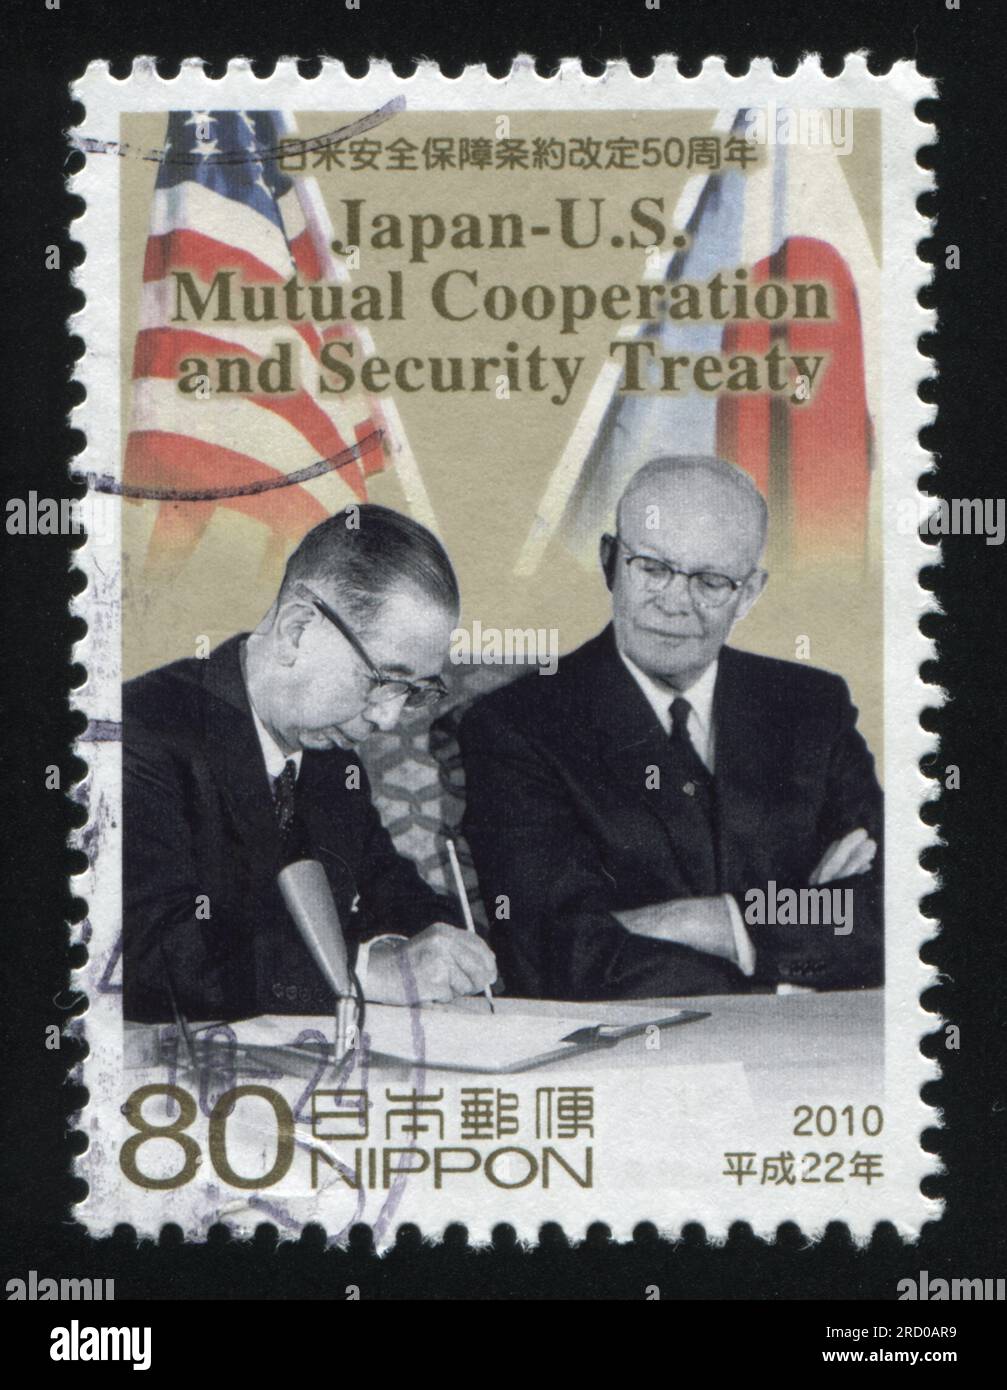 RUSSIA KALININGRAD, 22 APRIL 2016: stamp printed by Japan, shows two statesmen signing security treaty, circa 2010 Stock Photo